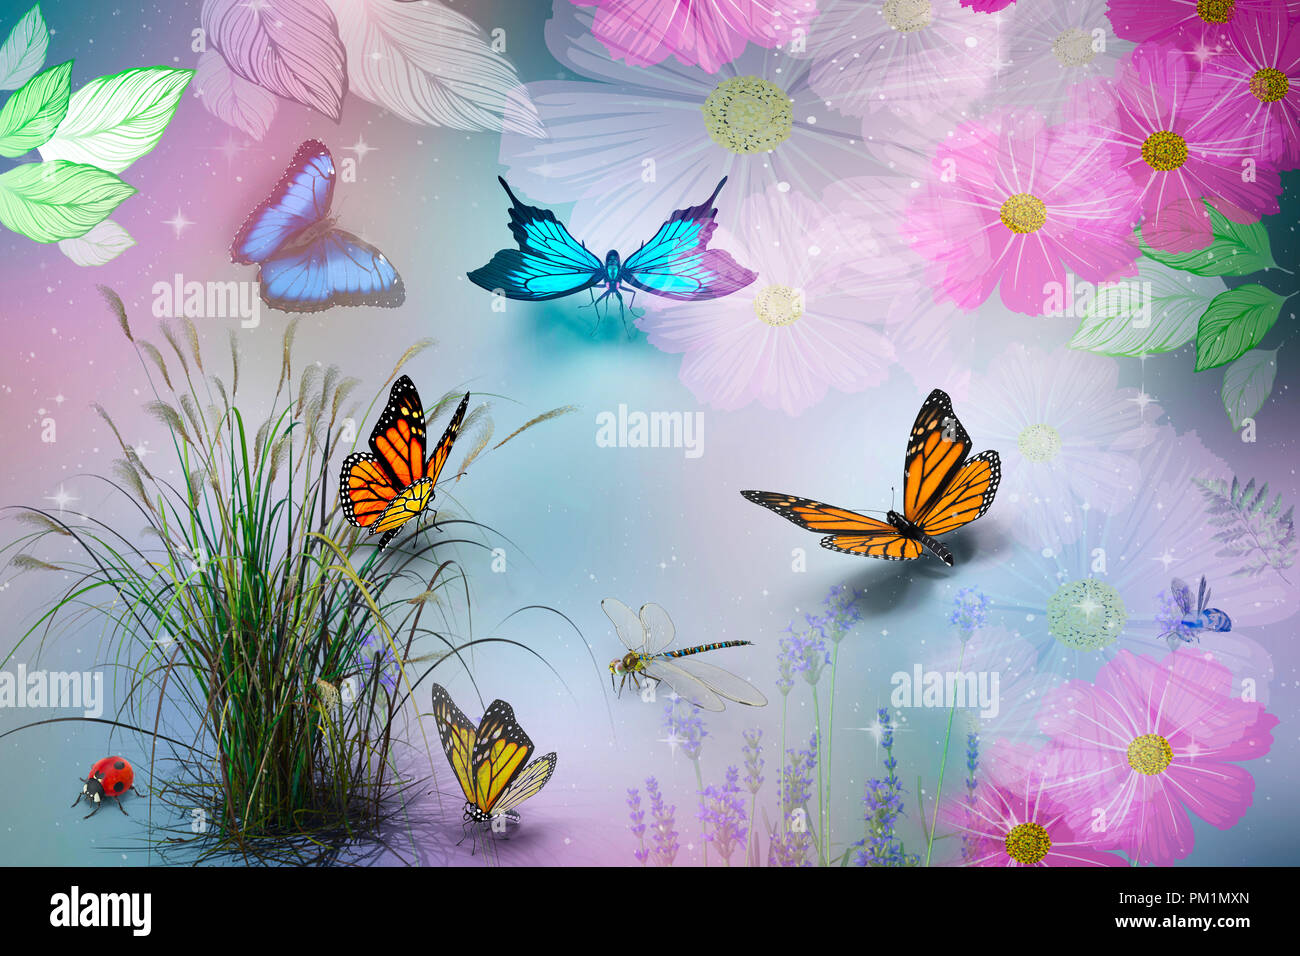 Abstract image of different butterflies on the background of flowers and plants d rendering stock photo